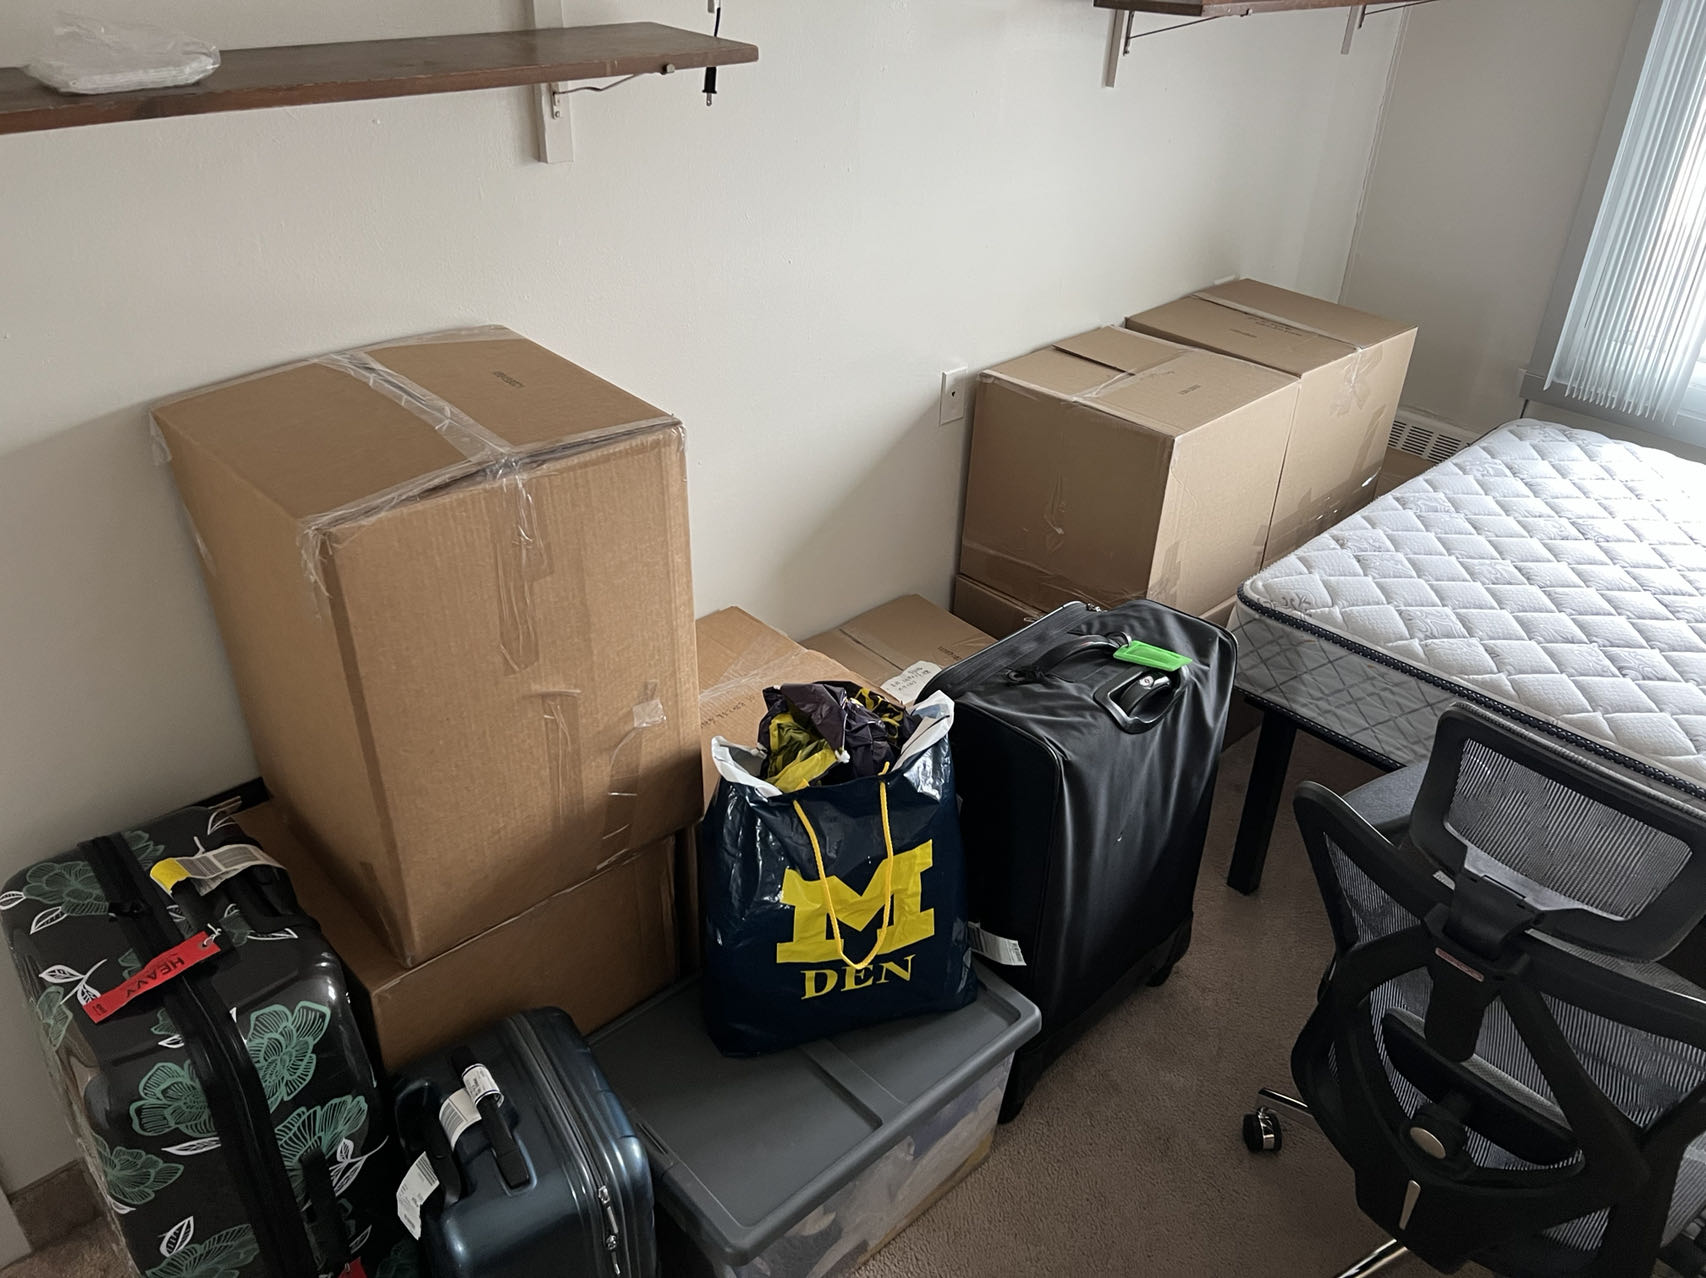 Picture of several cardboard boxes and luggages in the author's new apartment room